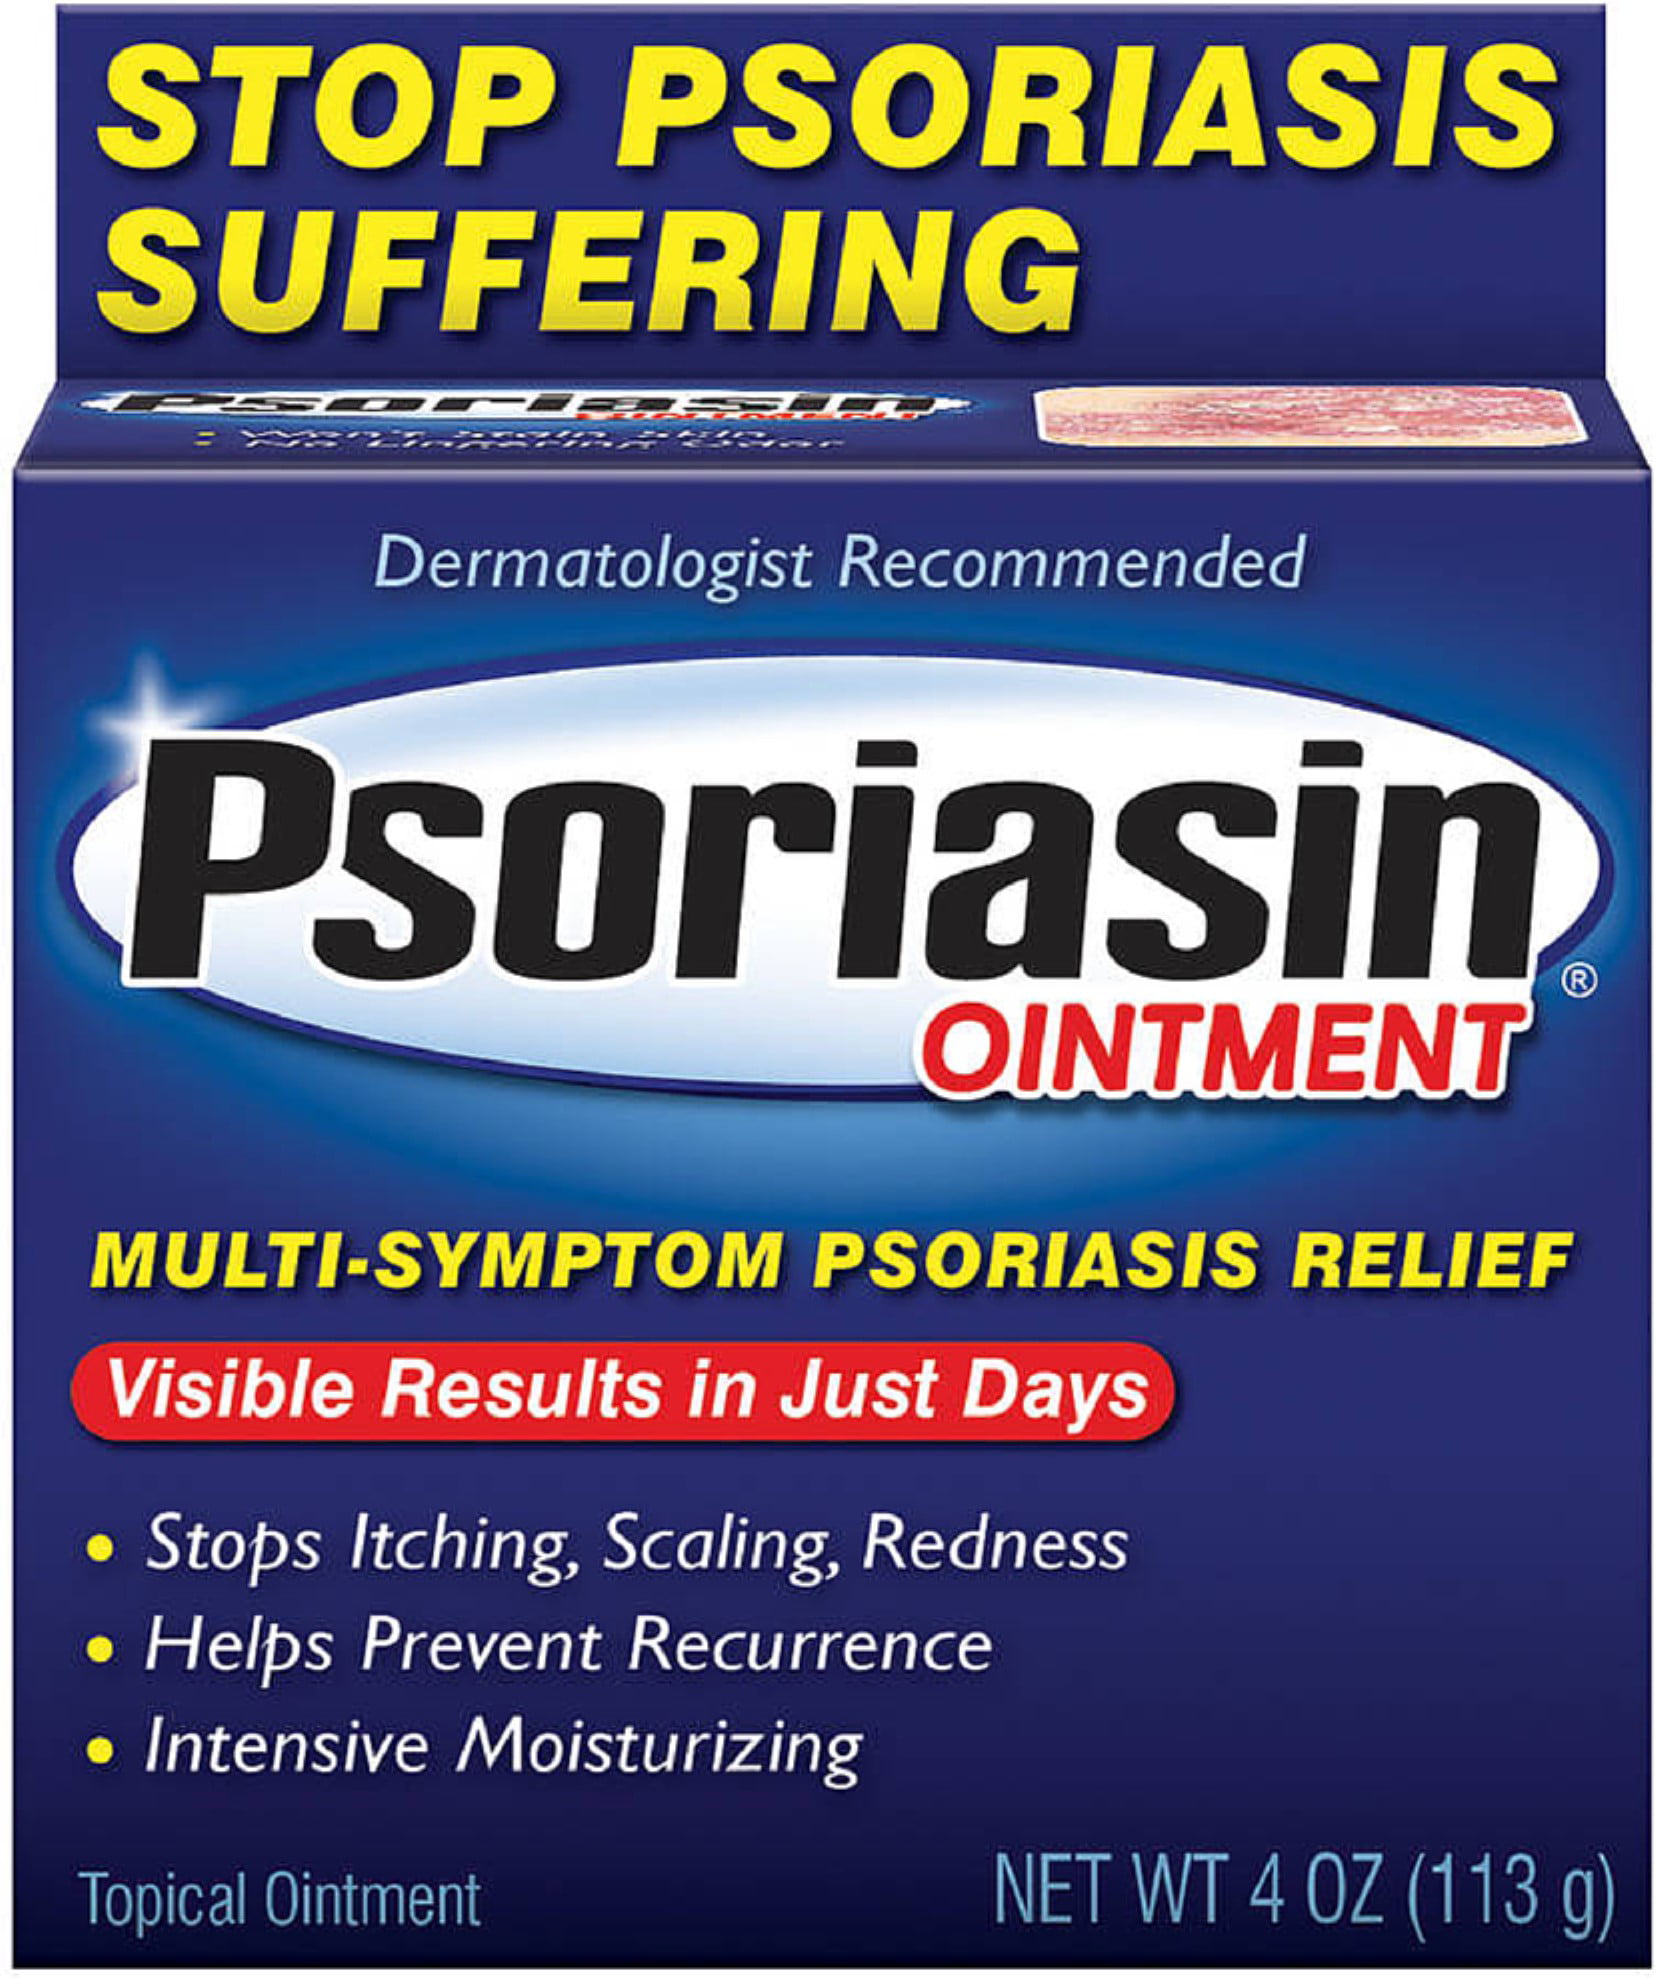 psoriasin ointment)